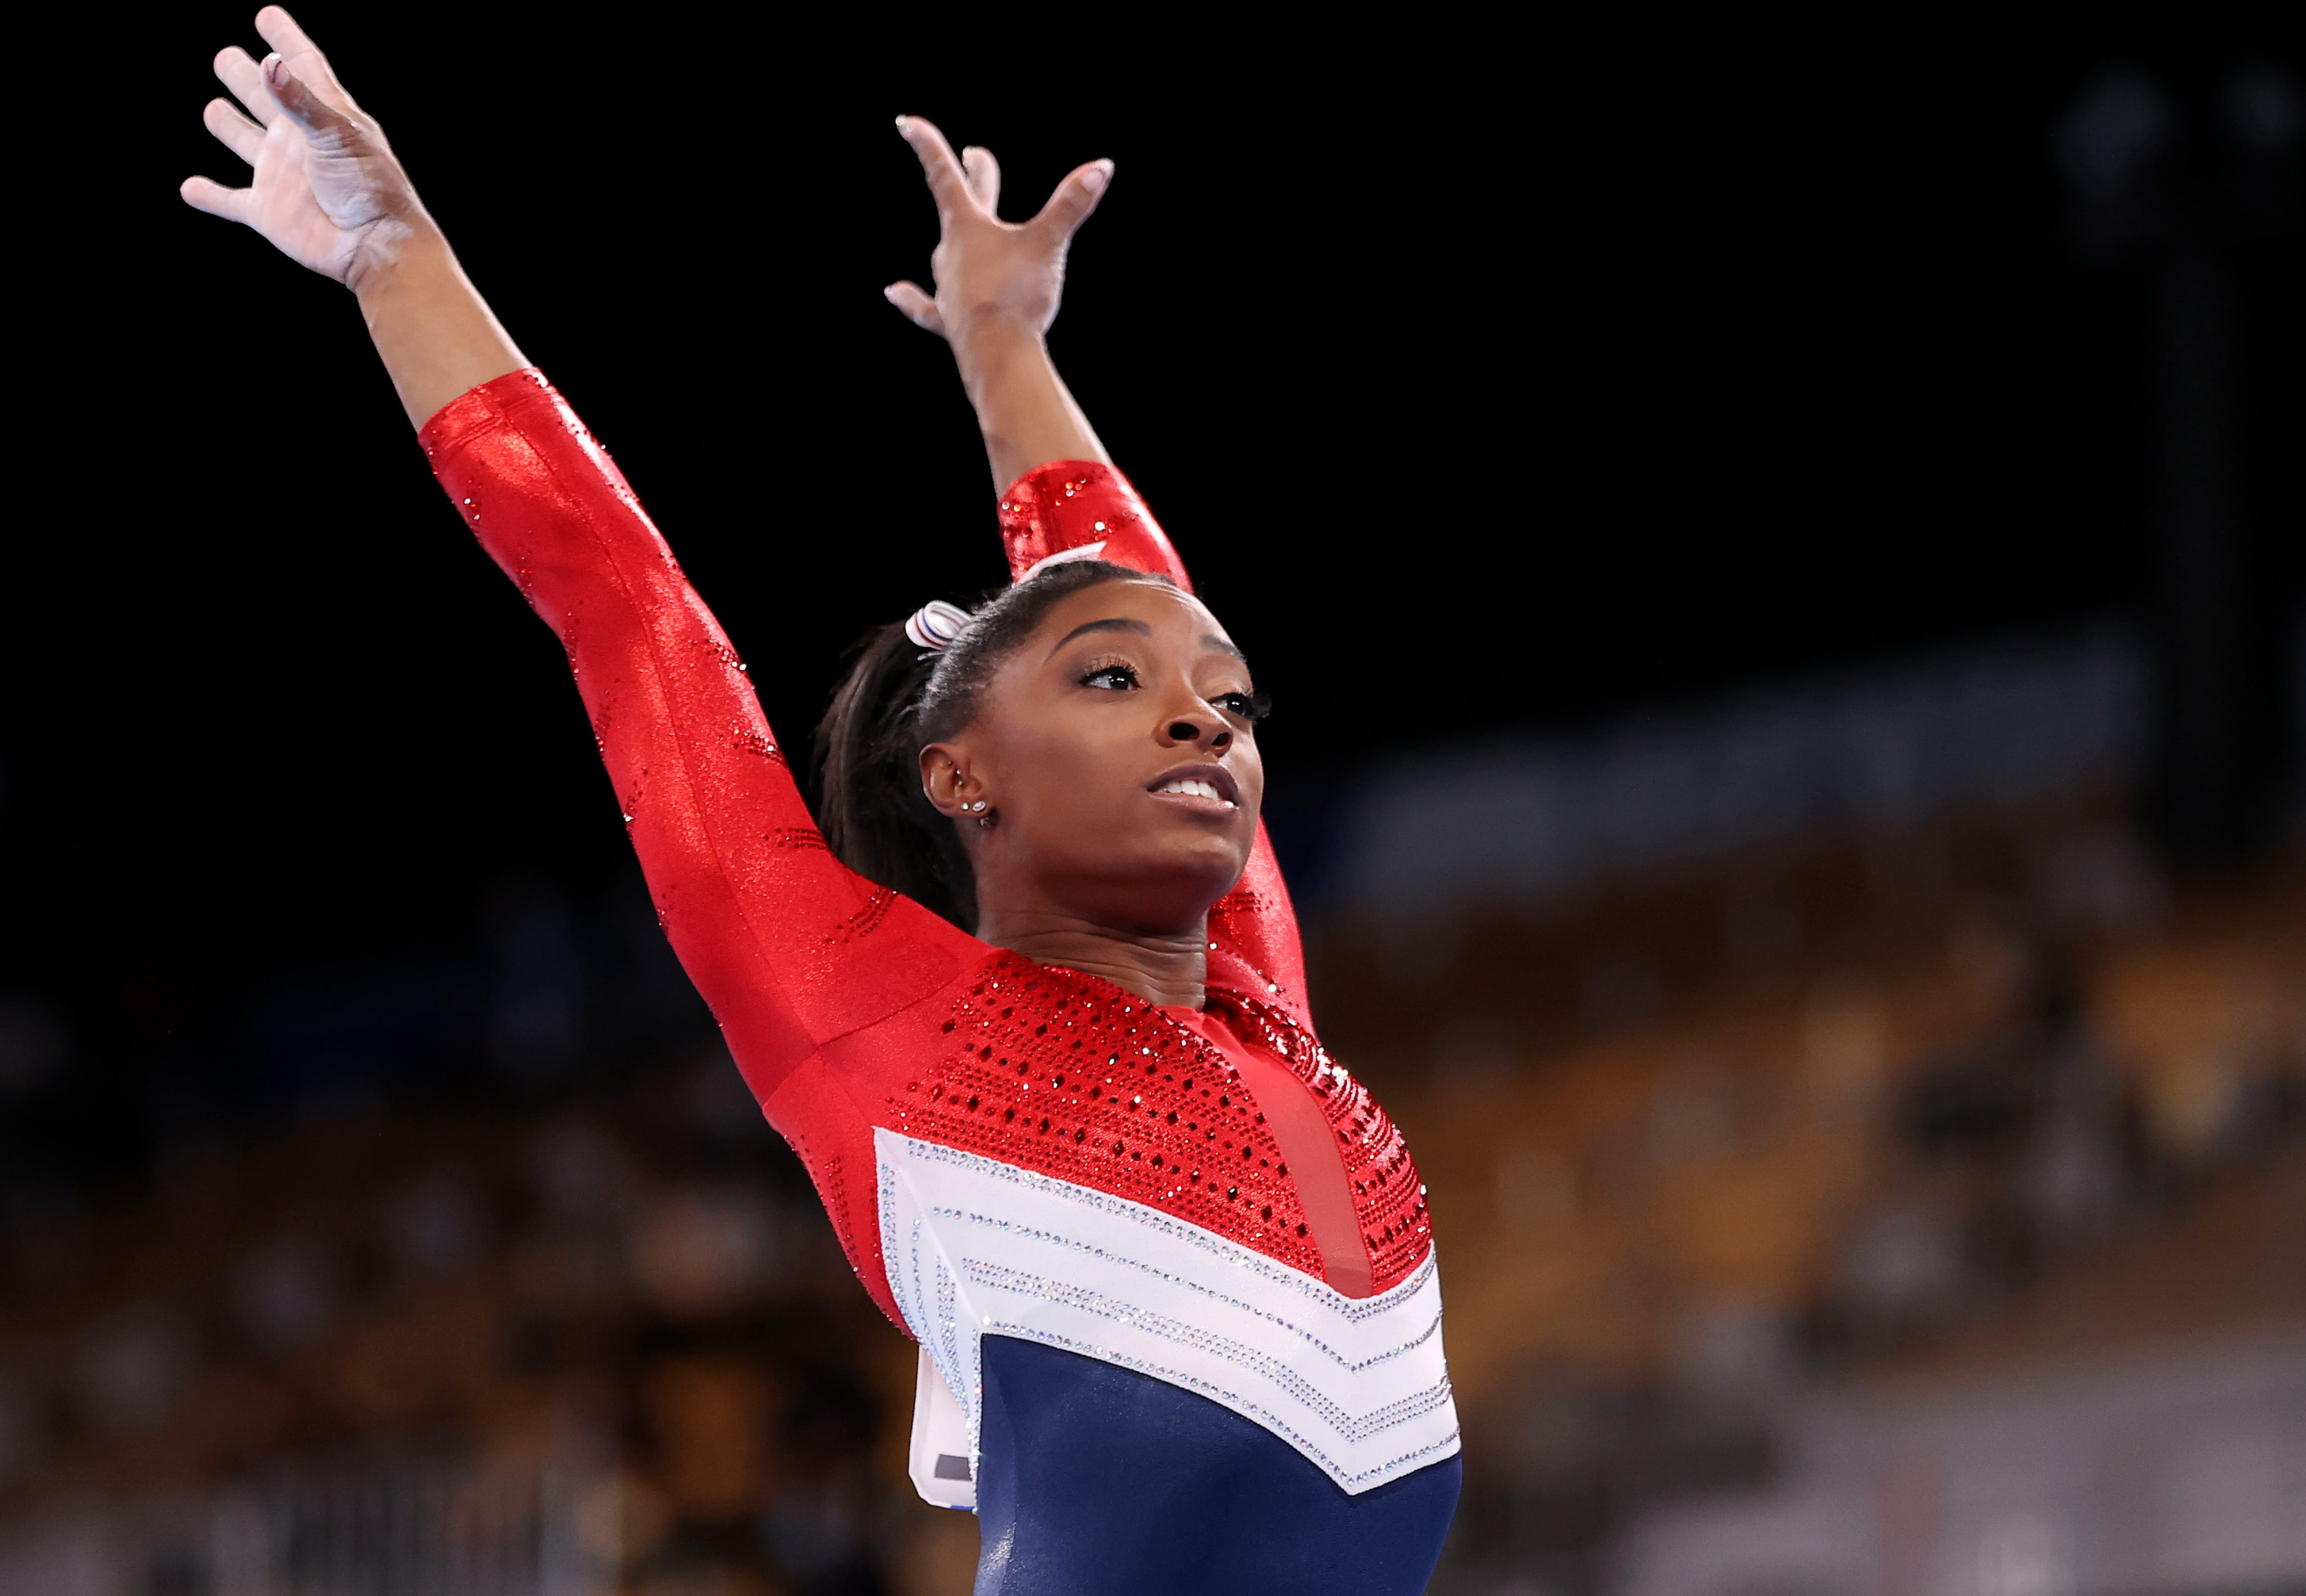 Simone Biles Is Returning to the Mat For Her First Gymnastics Competition in 2 Years